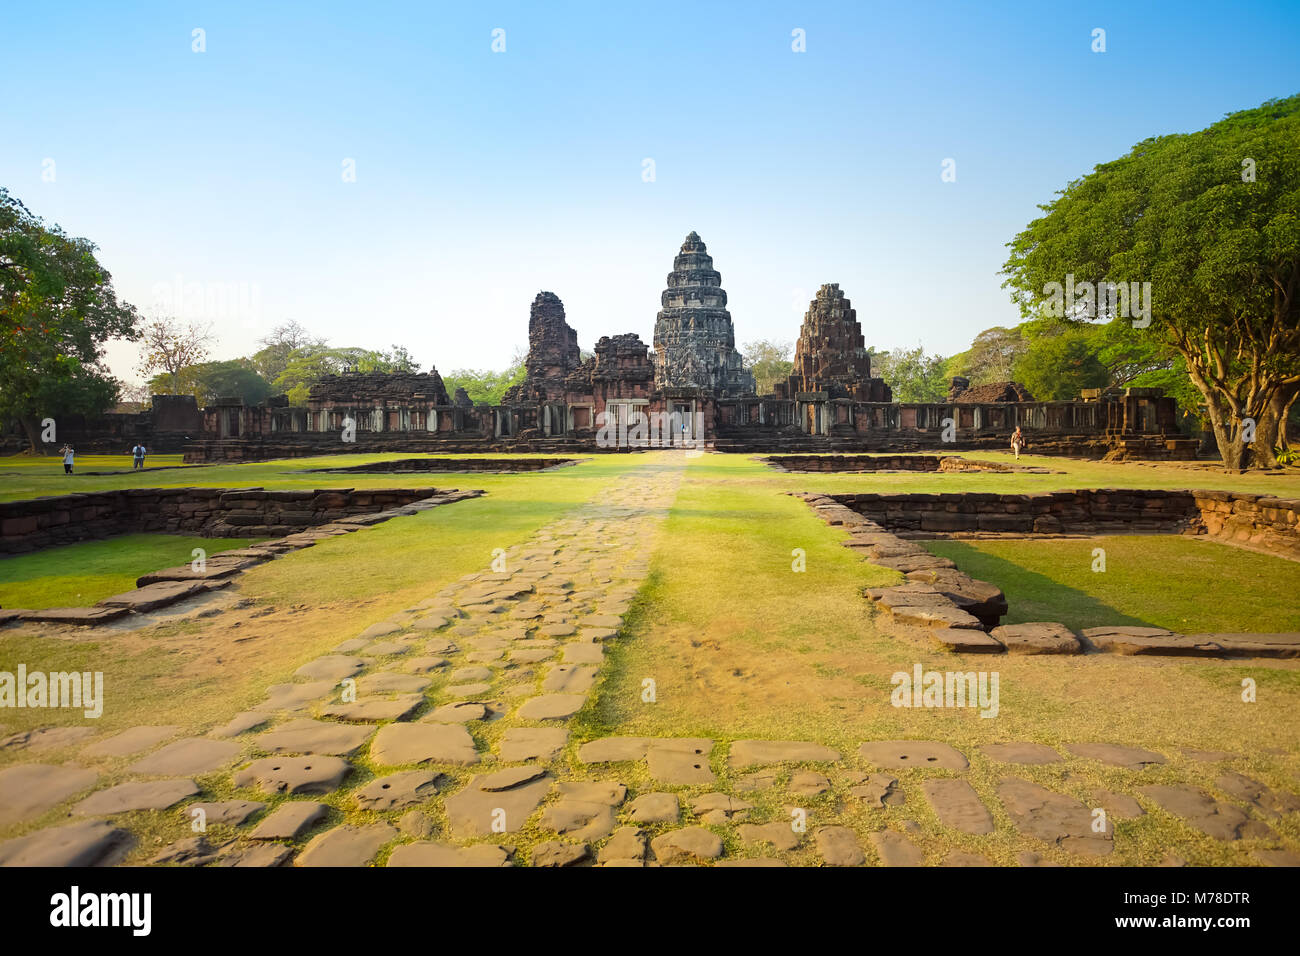 NAKHON RATCHASIMA, THAILAND - February 15, 2018: The world heritage Prasat Hin Phimai in Nakhon Ratchasima province, Thailand. The old temple of the A Stock Photo